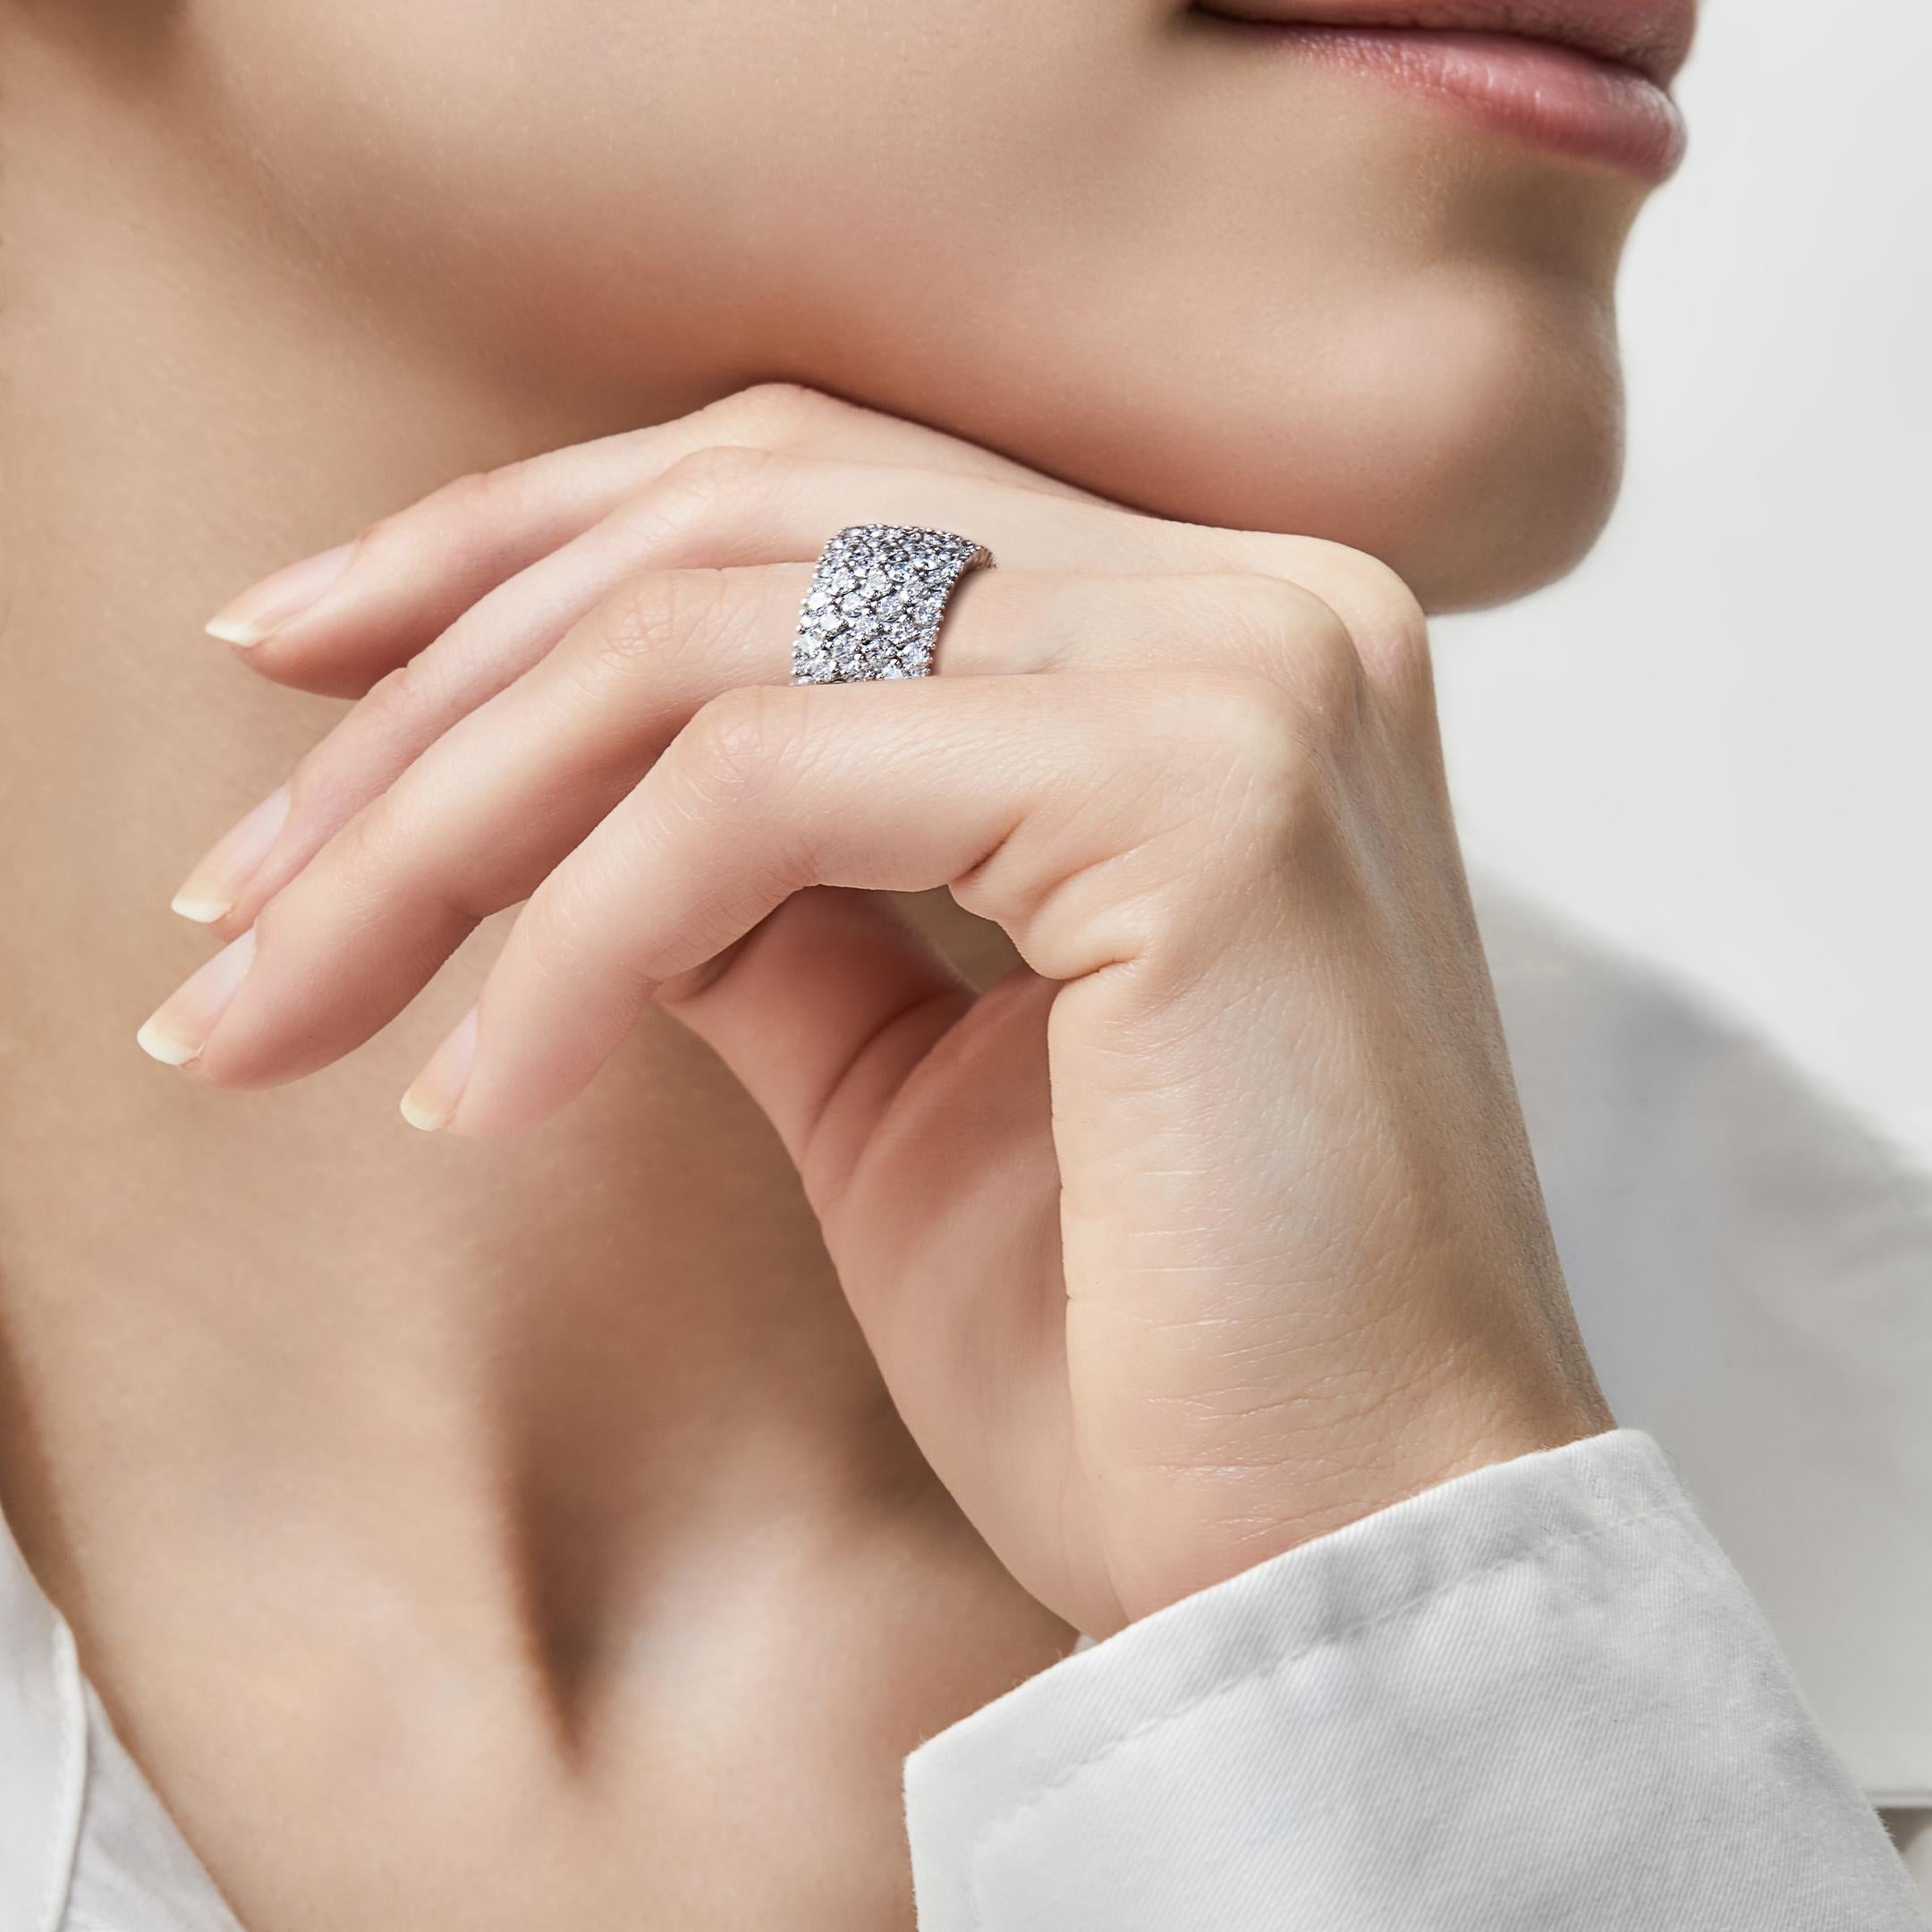 A flexible diamond façade gives the appearance of the stones being interwoven in the Stretchy Diamond Tapestry Ring. The flexible 18-karat white gold construction offers unparalleled comfort in this style that easily stretches to slide over the